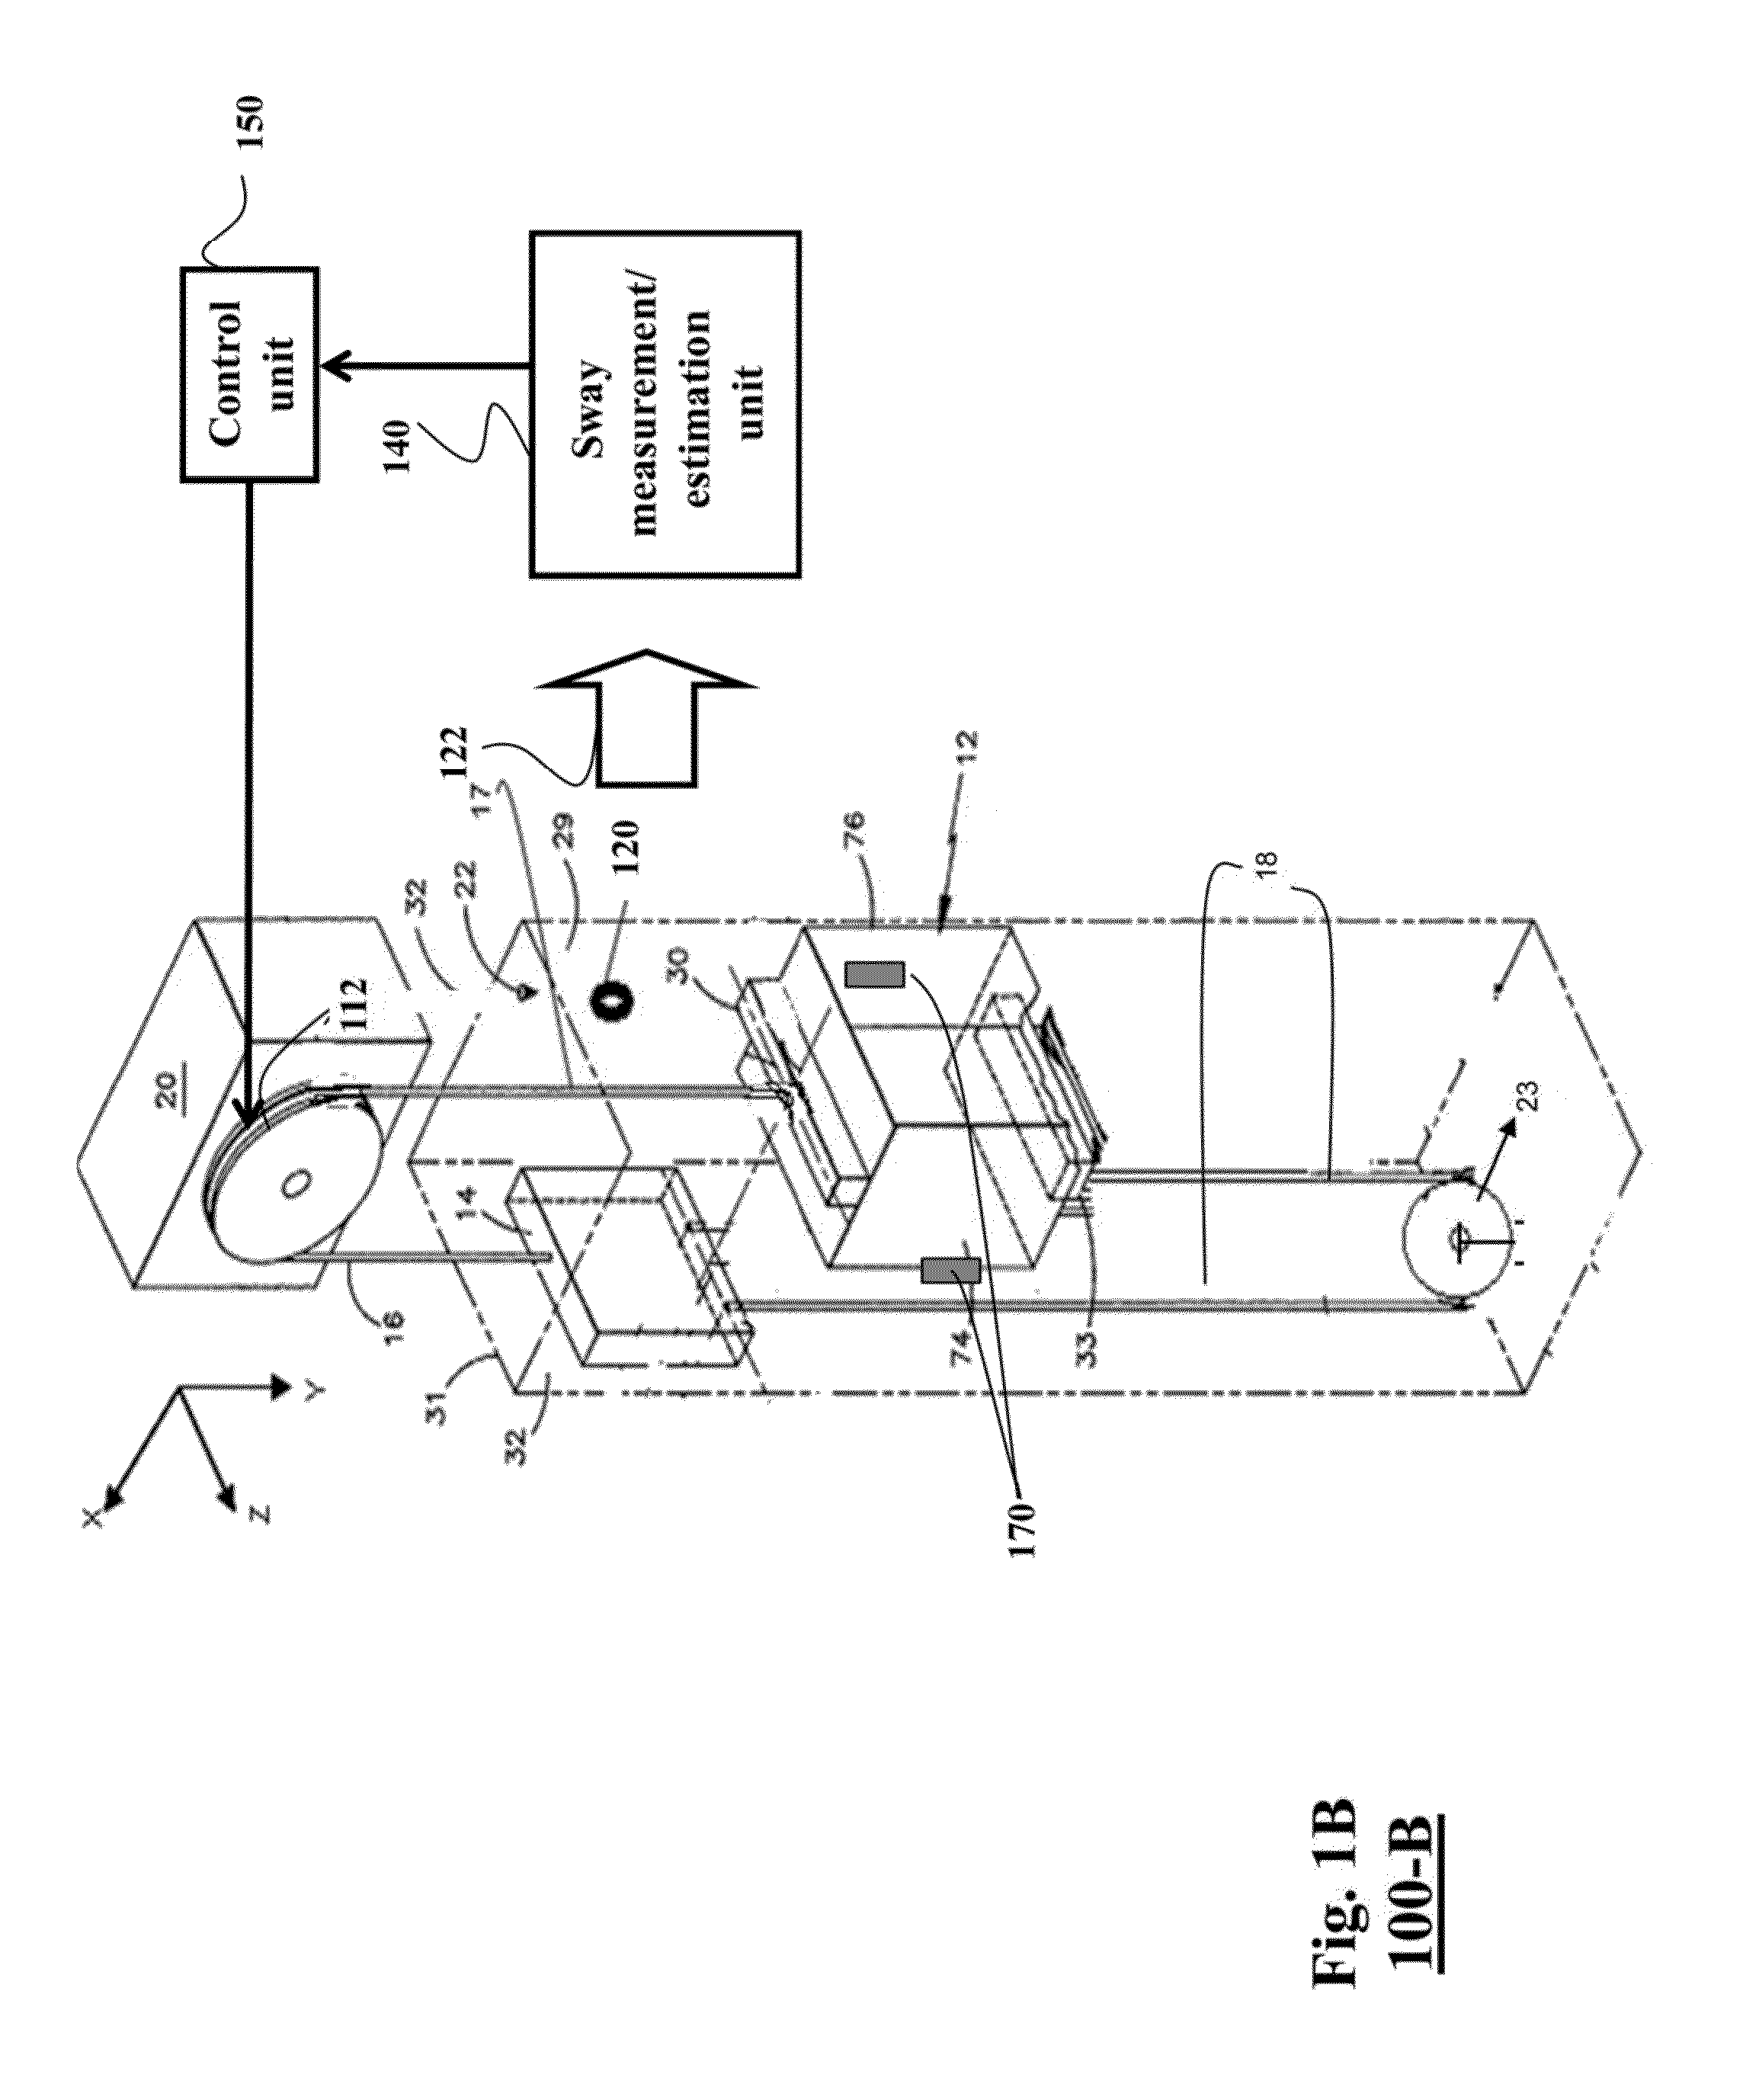 Method and System for Controlling Sway of Ropes in Elevator Systems by Modulating Tension on the Ropes